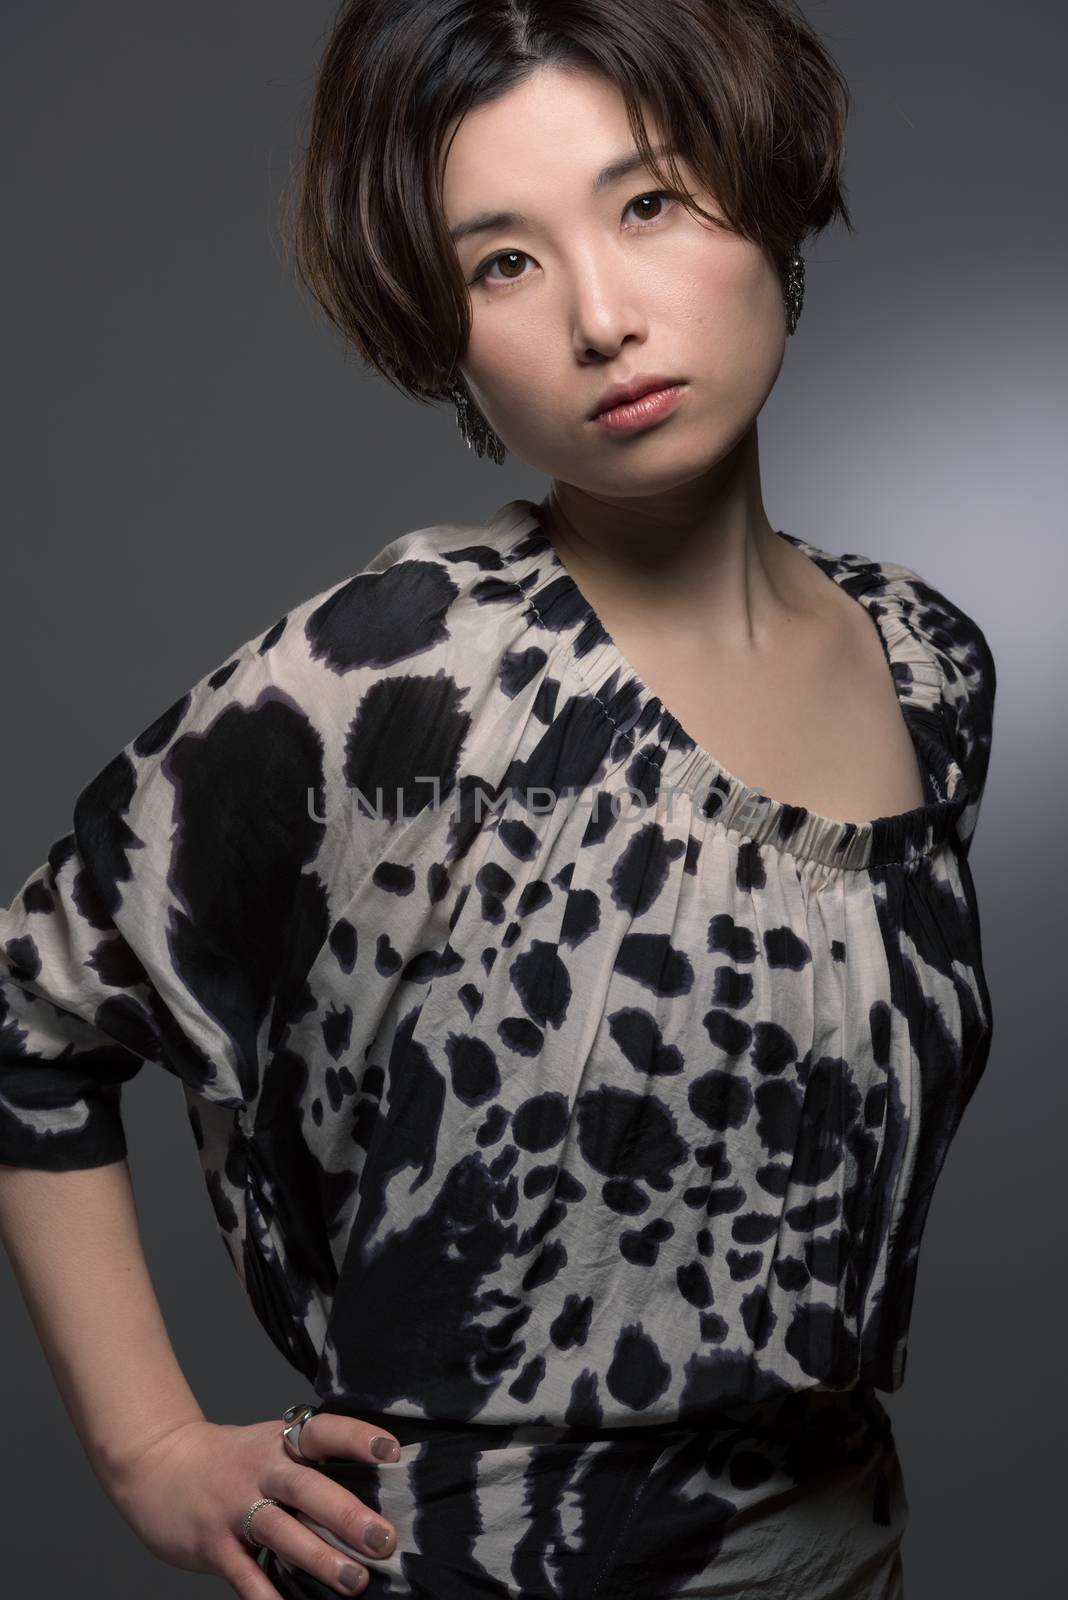 A portrait of a young and beautiful Japanese woman posed confidently shot on a dark background.